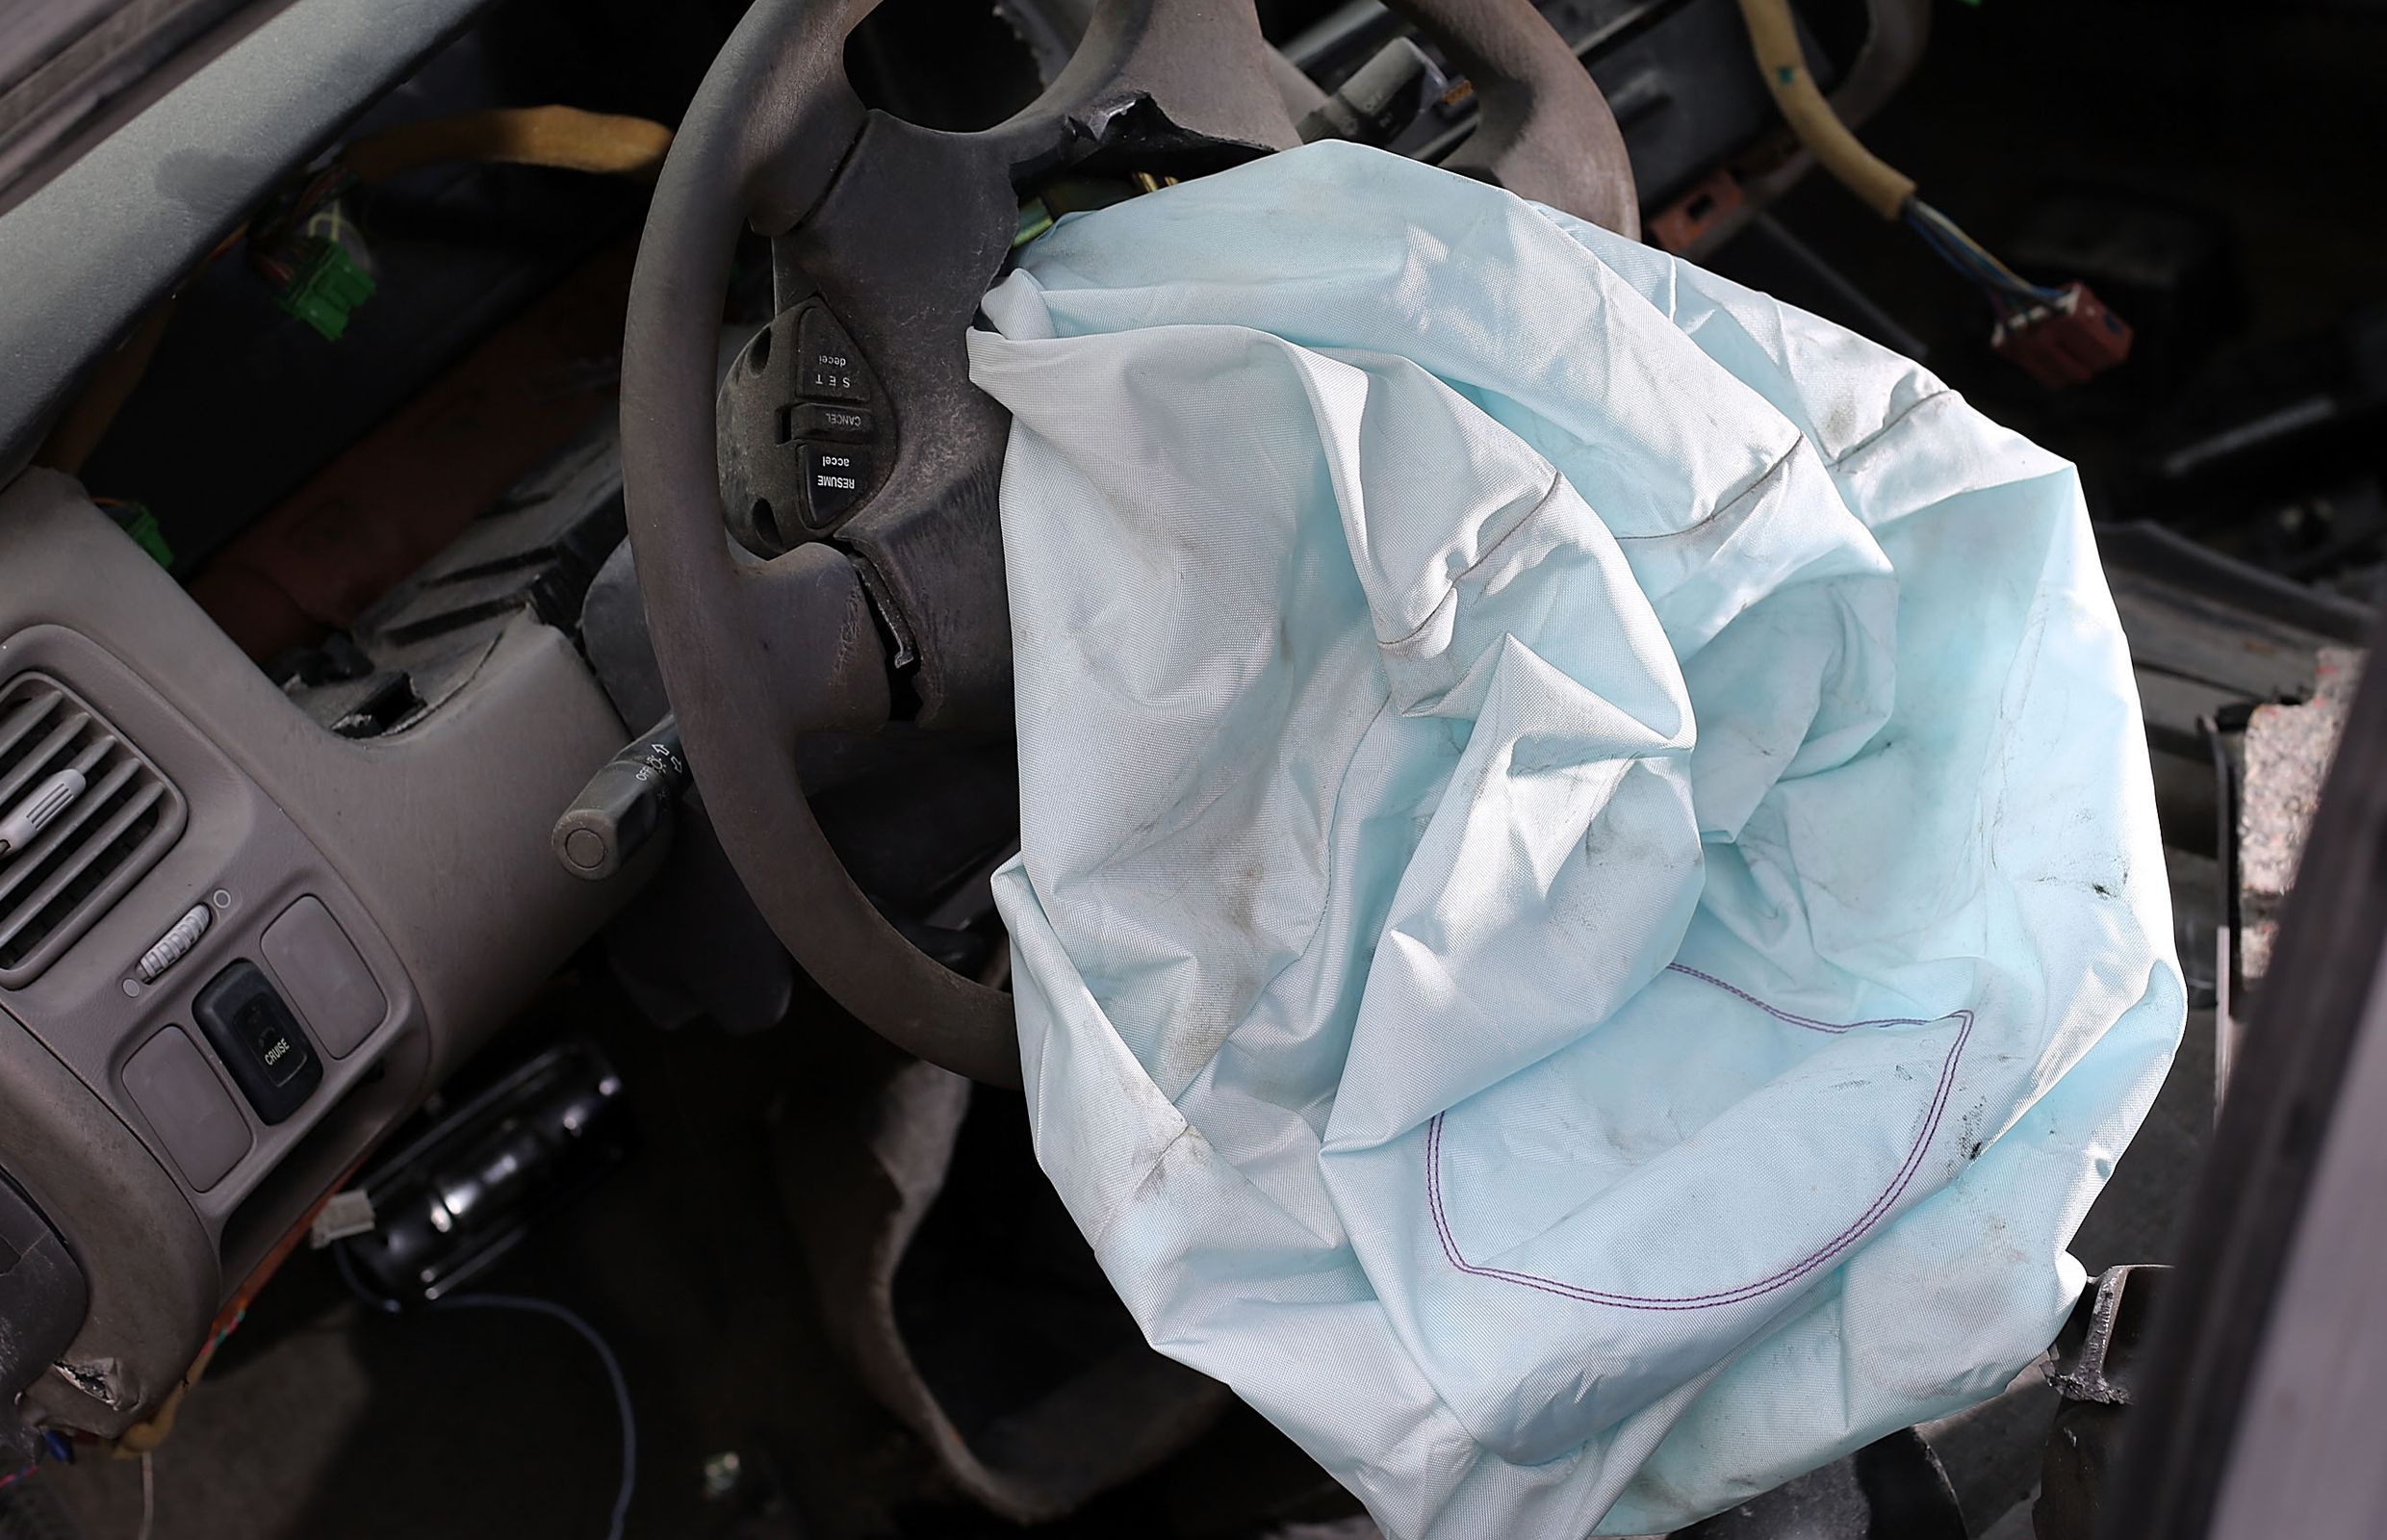 NHTSA Launches New Investigation Into Takata Airbags